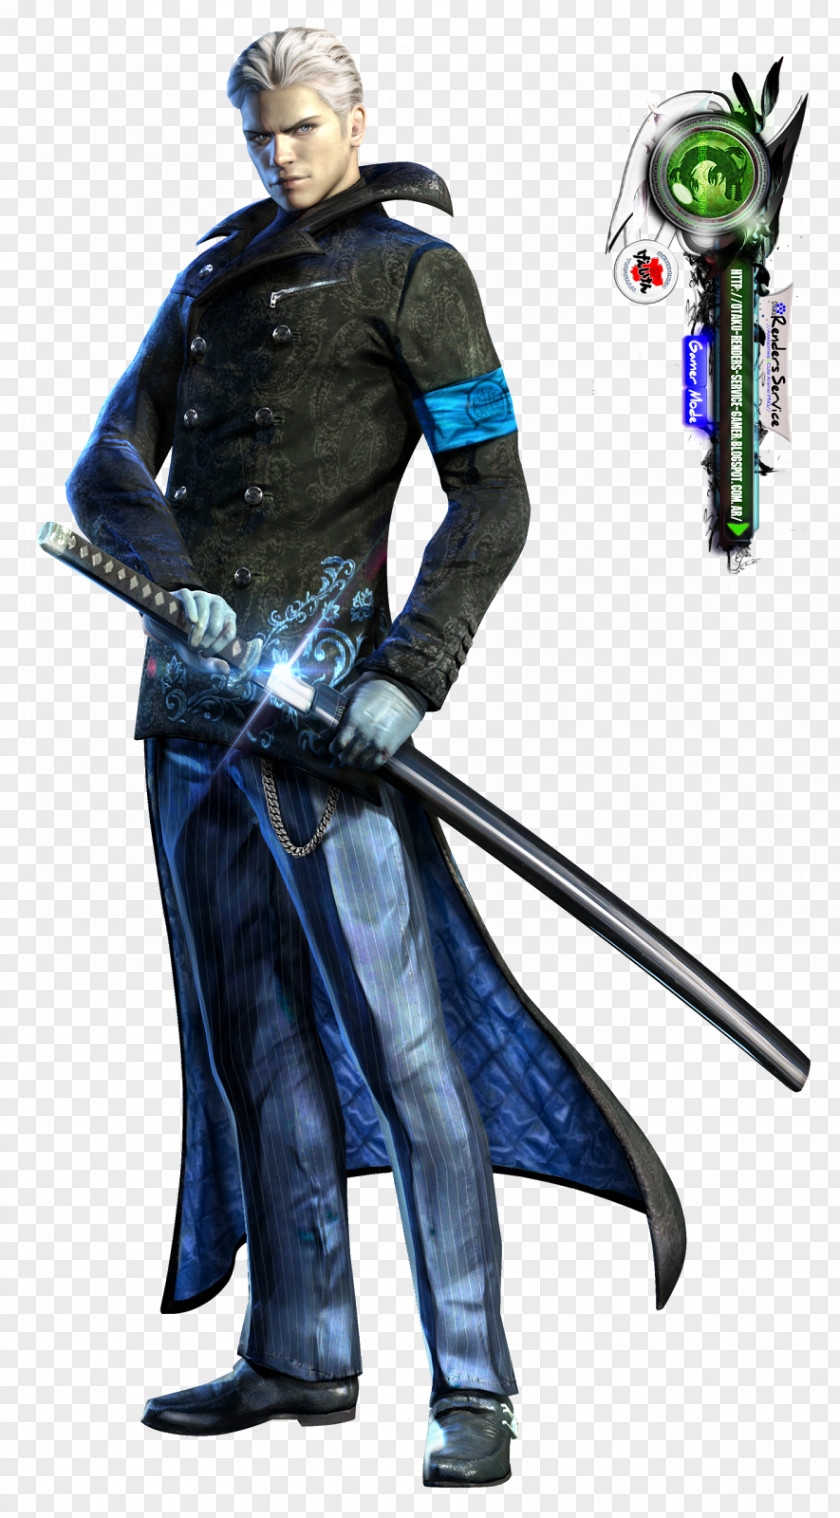 Dmc Sword DmC: Devil May Cry 3: Dante's Awakening 4 Cry: HD Collection PNG